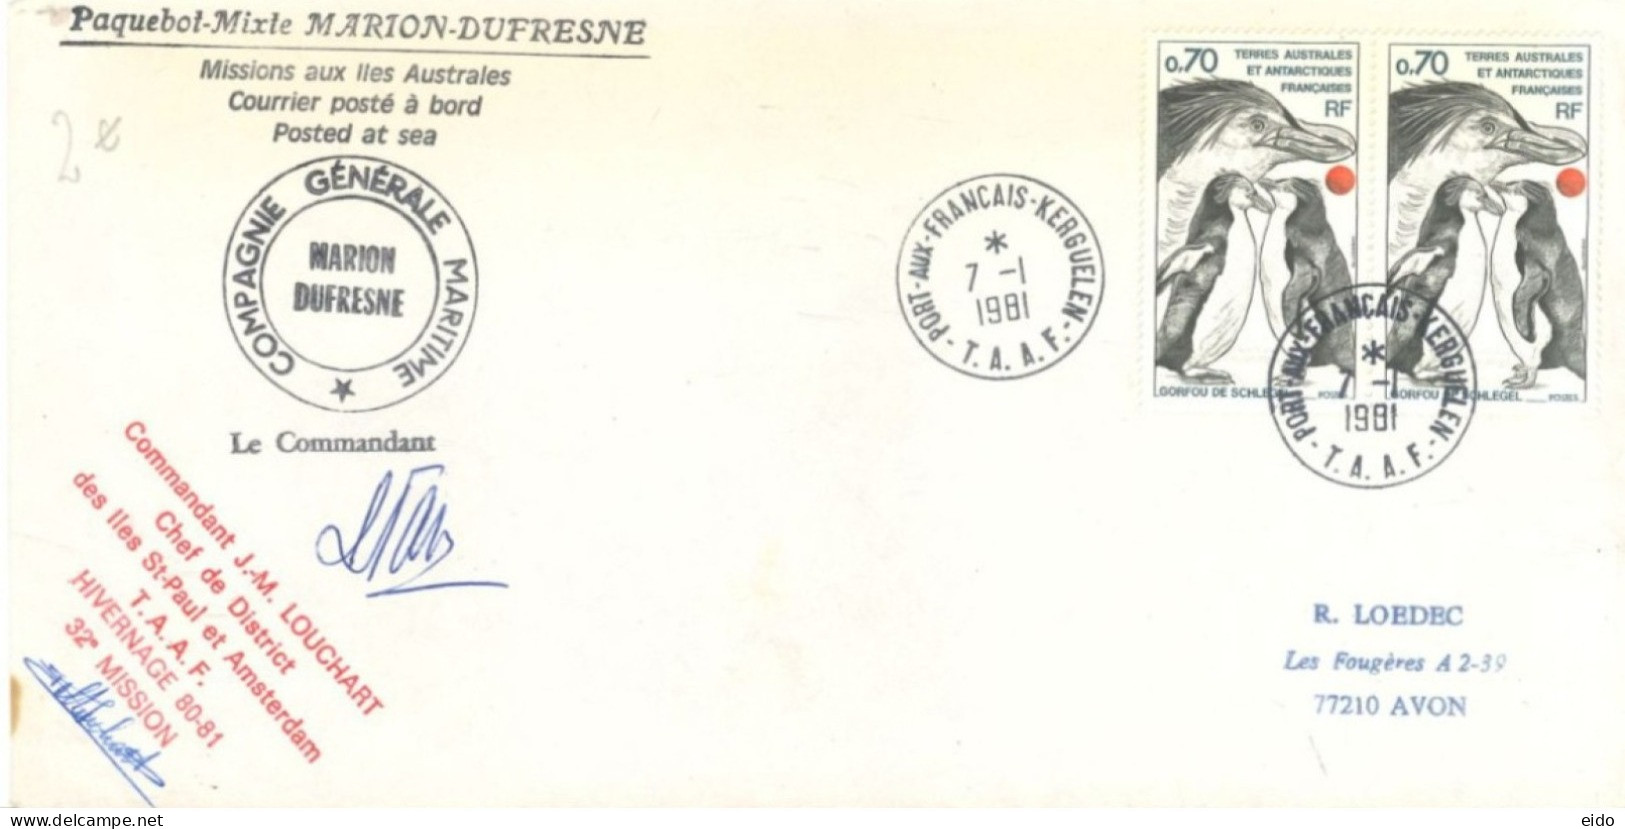 AUSTRALIAN ANTARCTIC TERRITORY - 1981, POSTED AT SEA SPECIAL COVER SIGNED BY COMMANDER J.M. LOUCHART SENT TO AVON FRANCE - Lettres & Documents